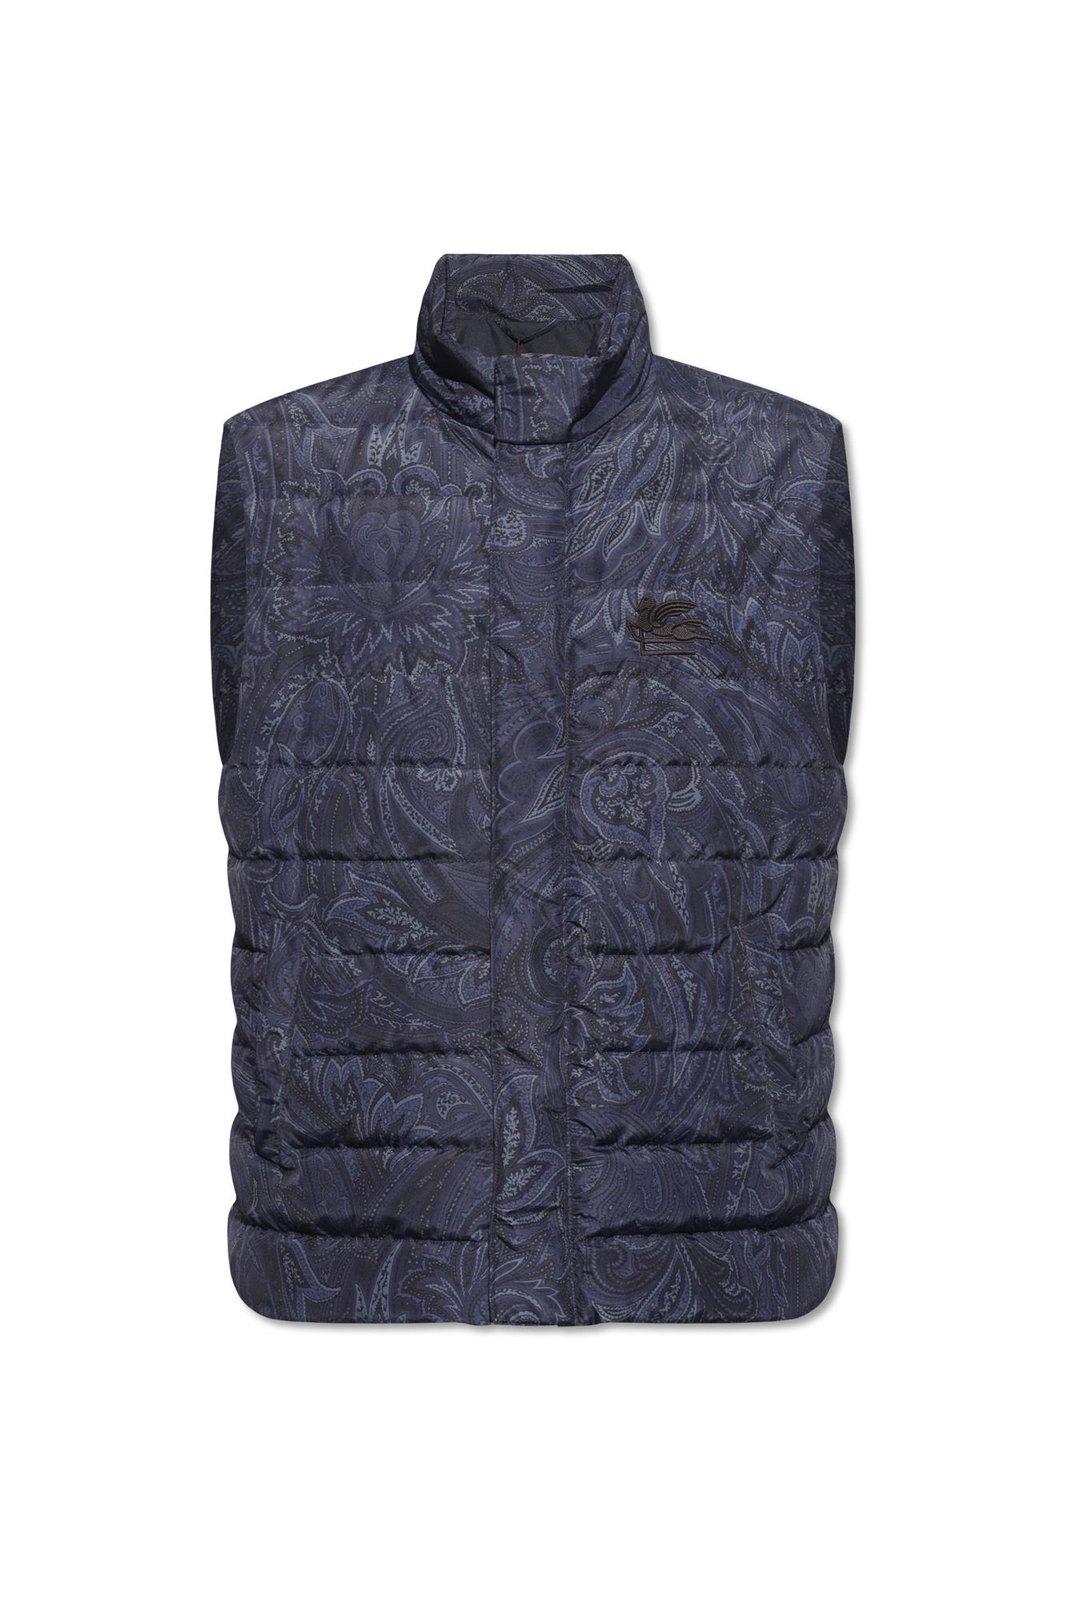 Paisley Print Quilted Down Vest